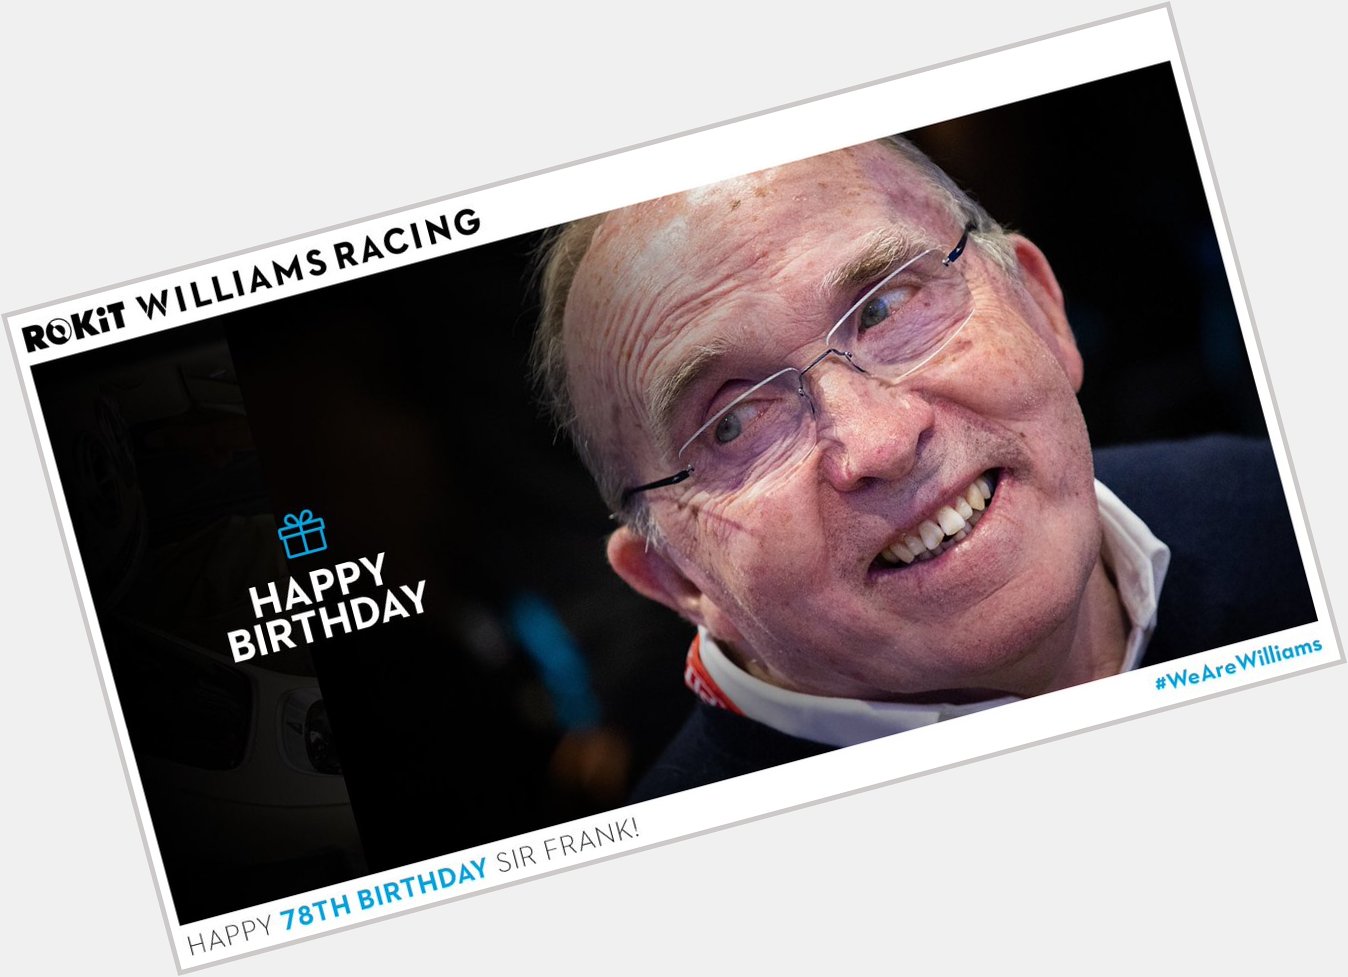 Happy Birthday to resident Sir Frank Williams. F1 legend. From  